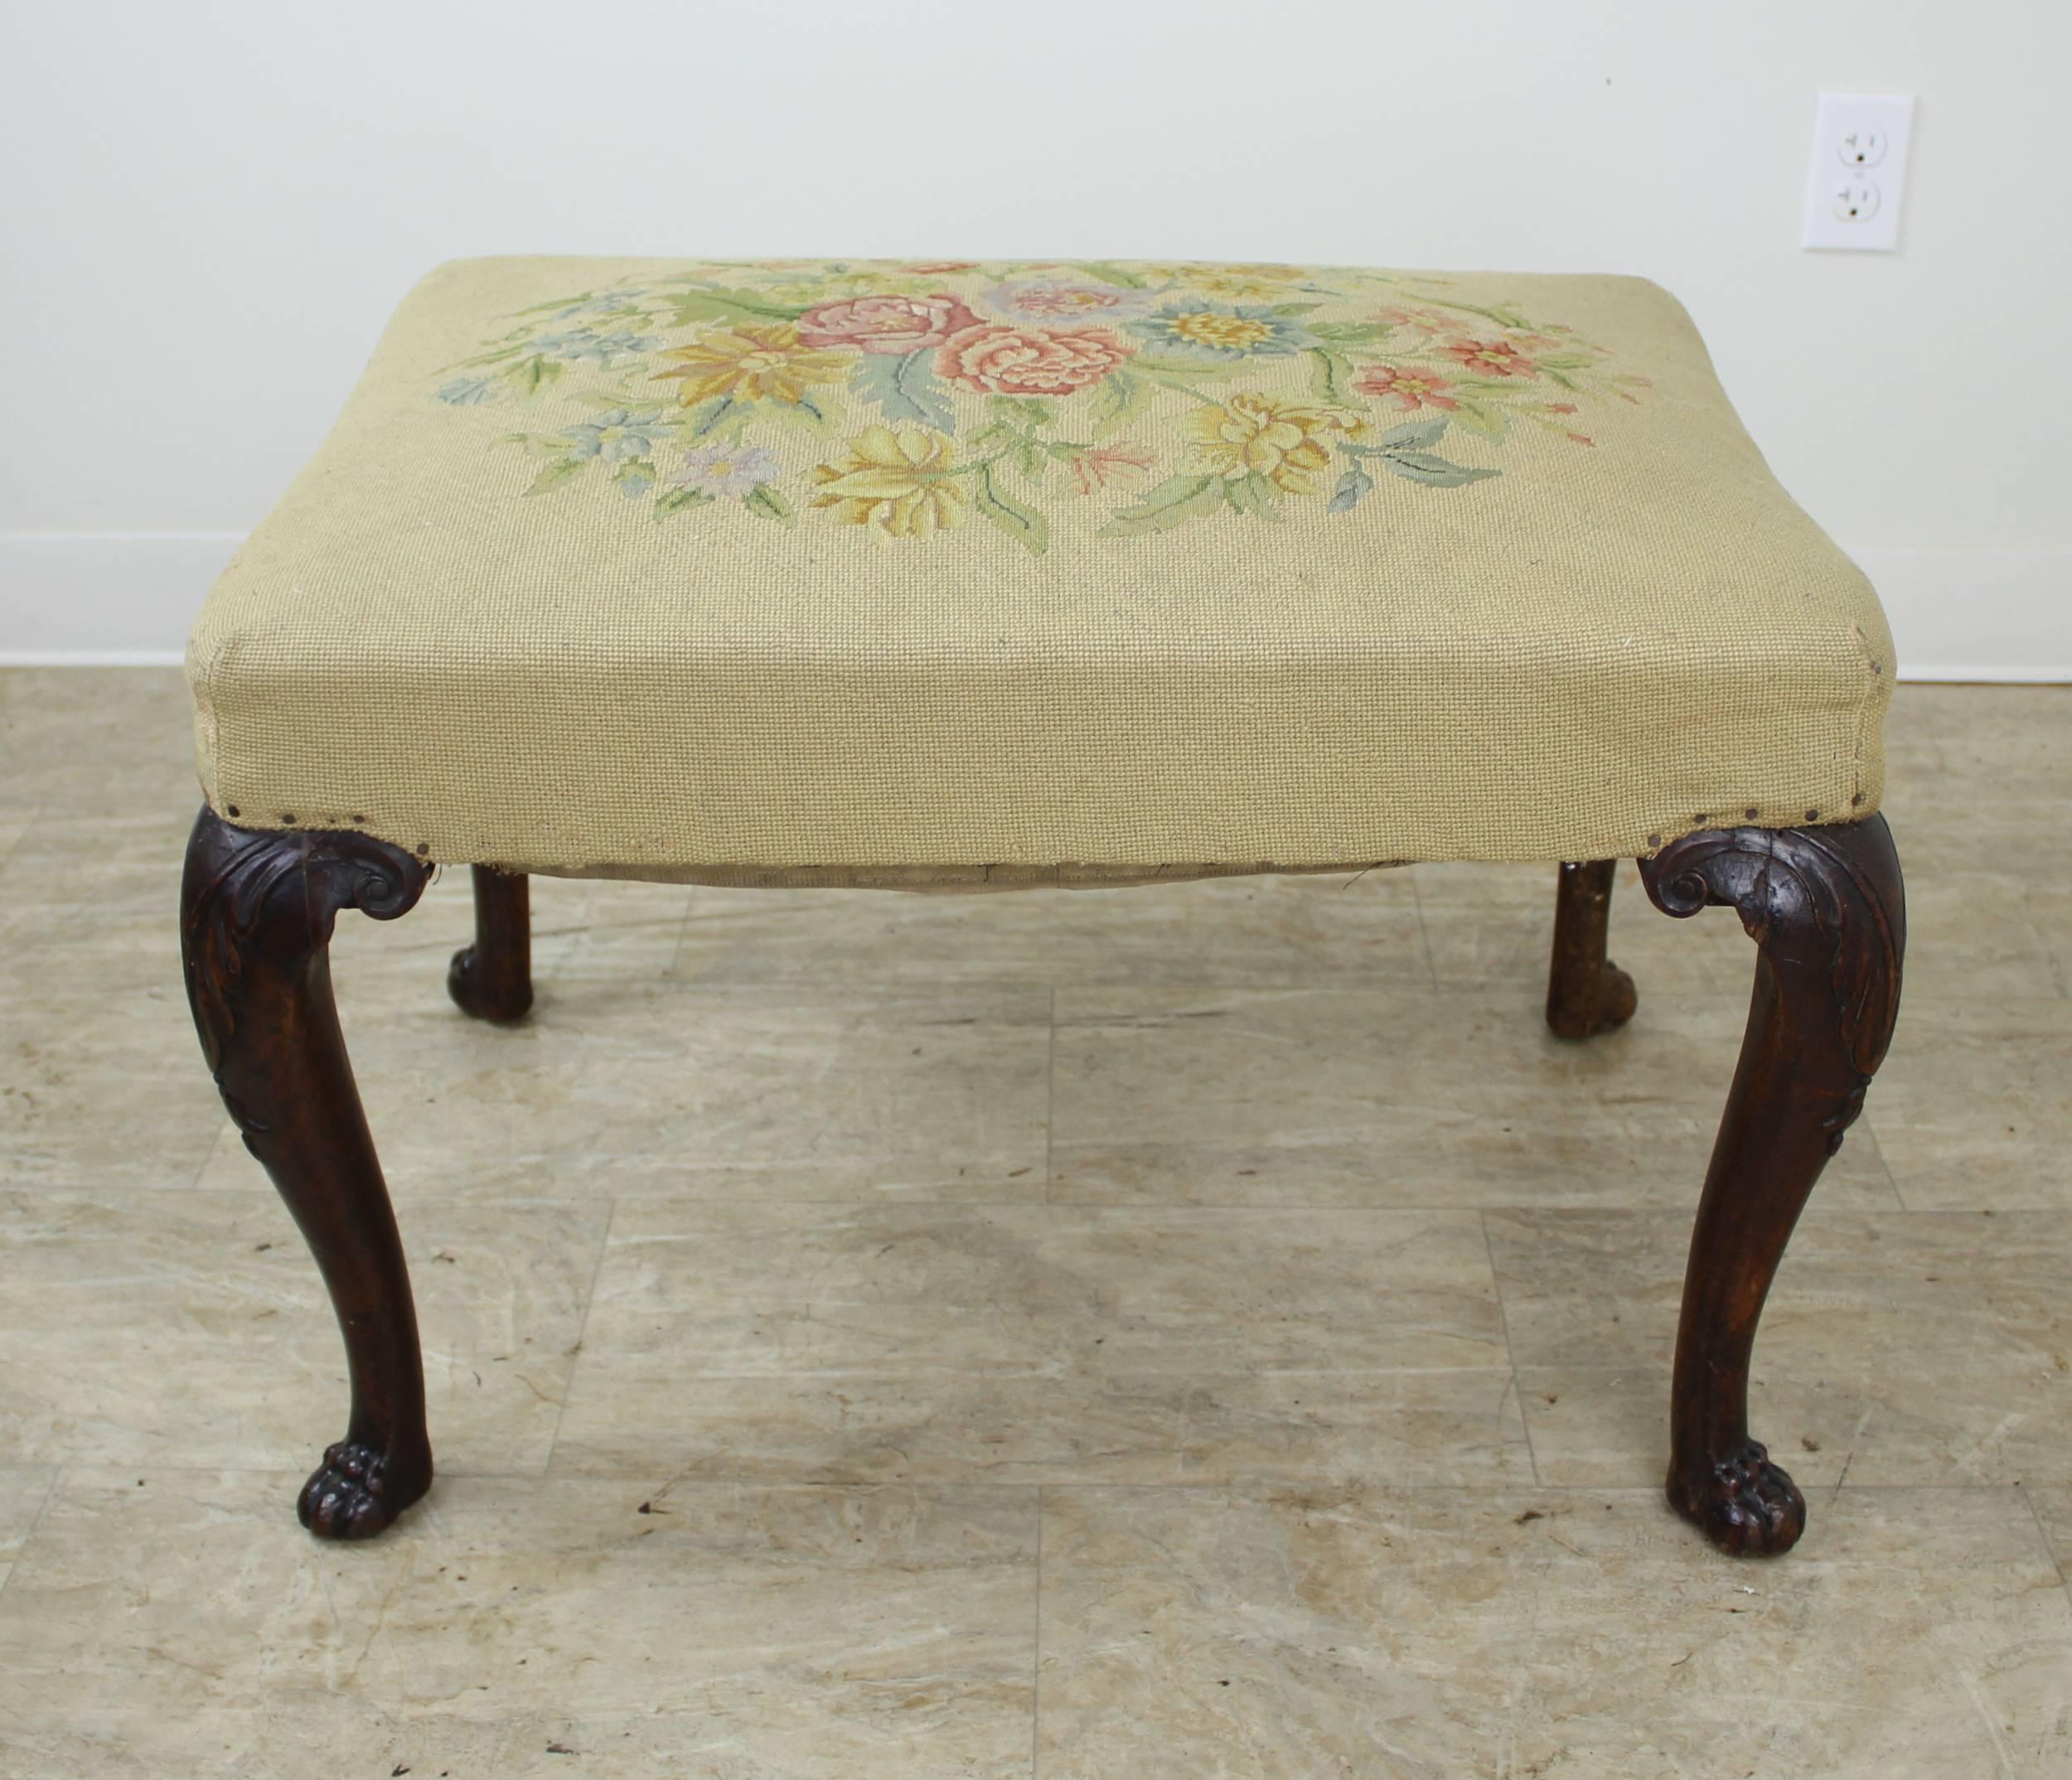 A decorative footstool with its original intricately embroidered seat and finely carved mahogany legs. The claw feet on this piece are particularly well articulated. The seat has good loft for a piece of its age. Sturdy and would make a nice